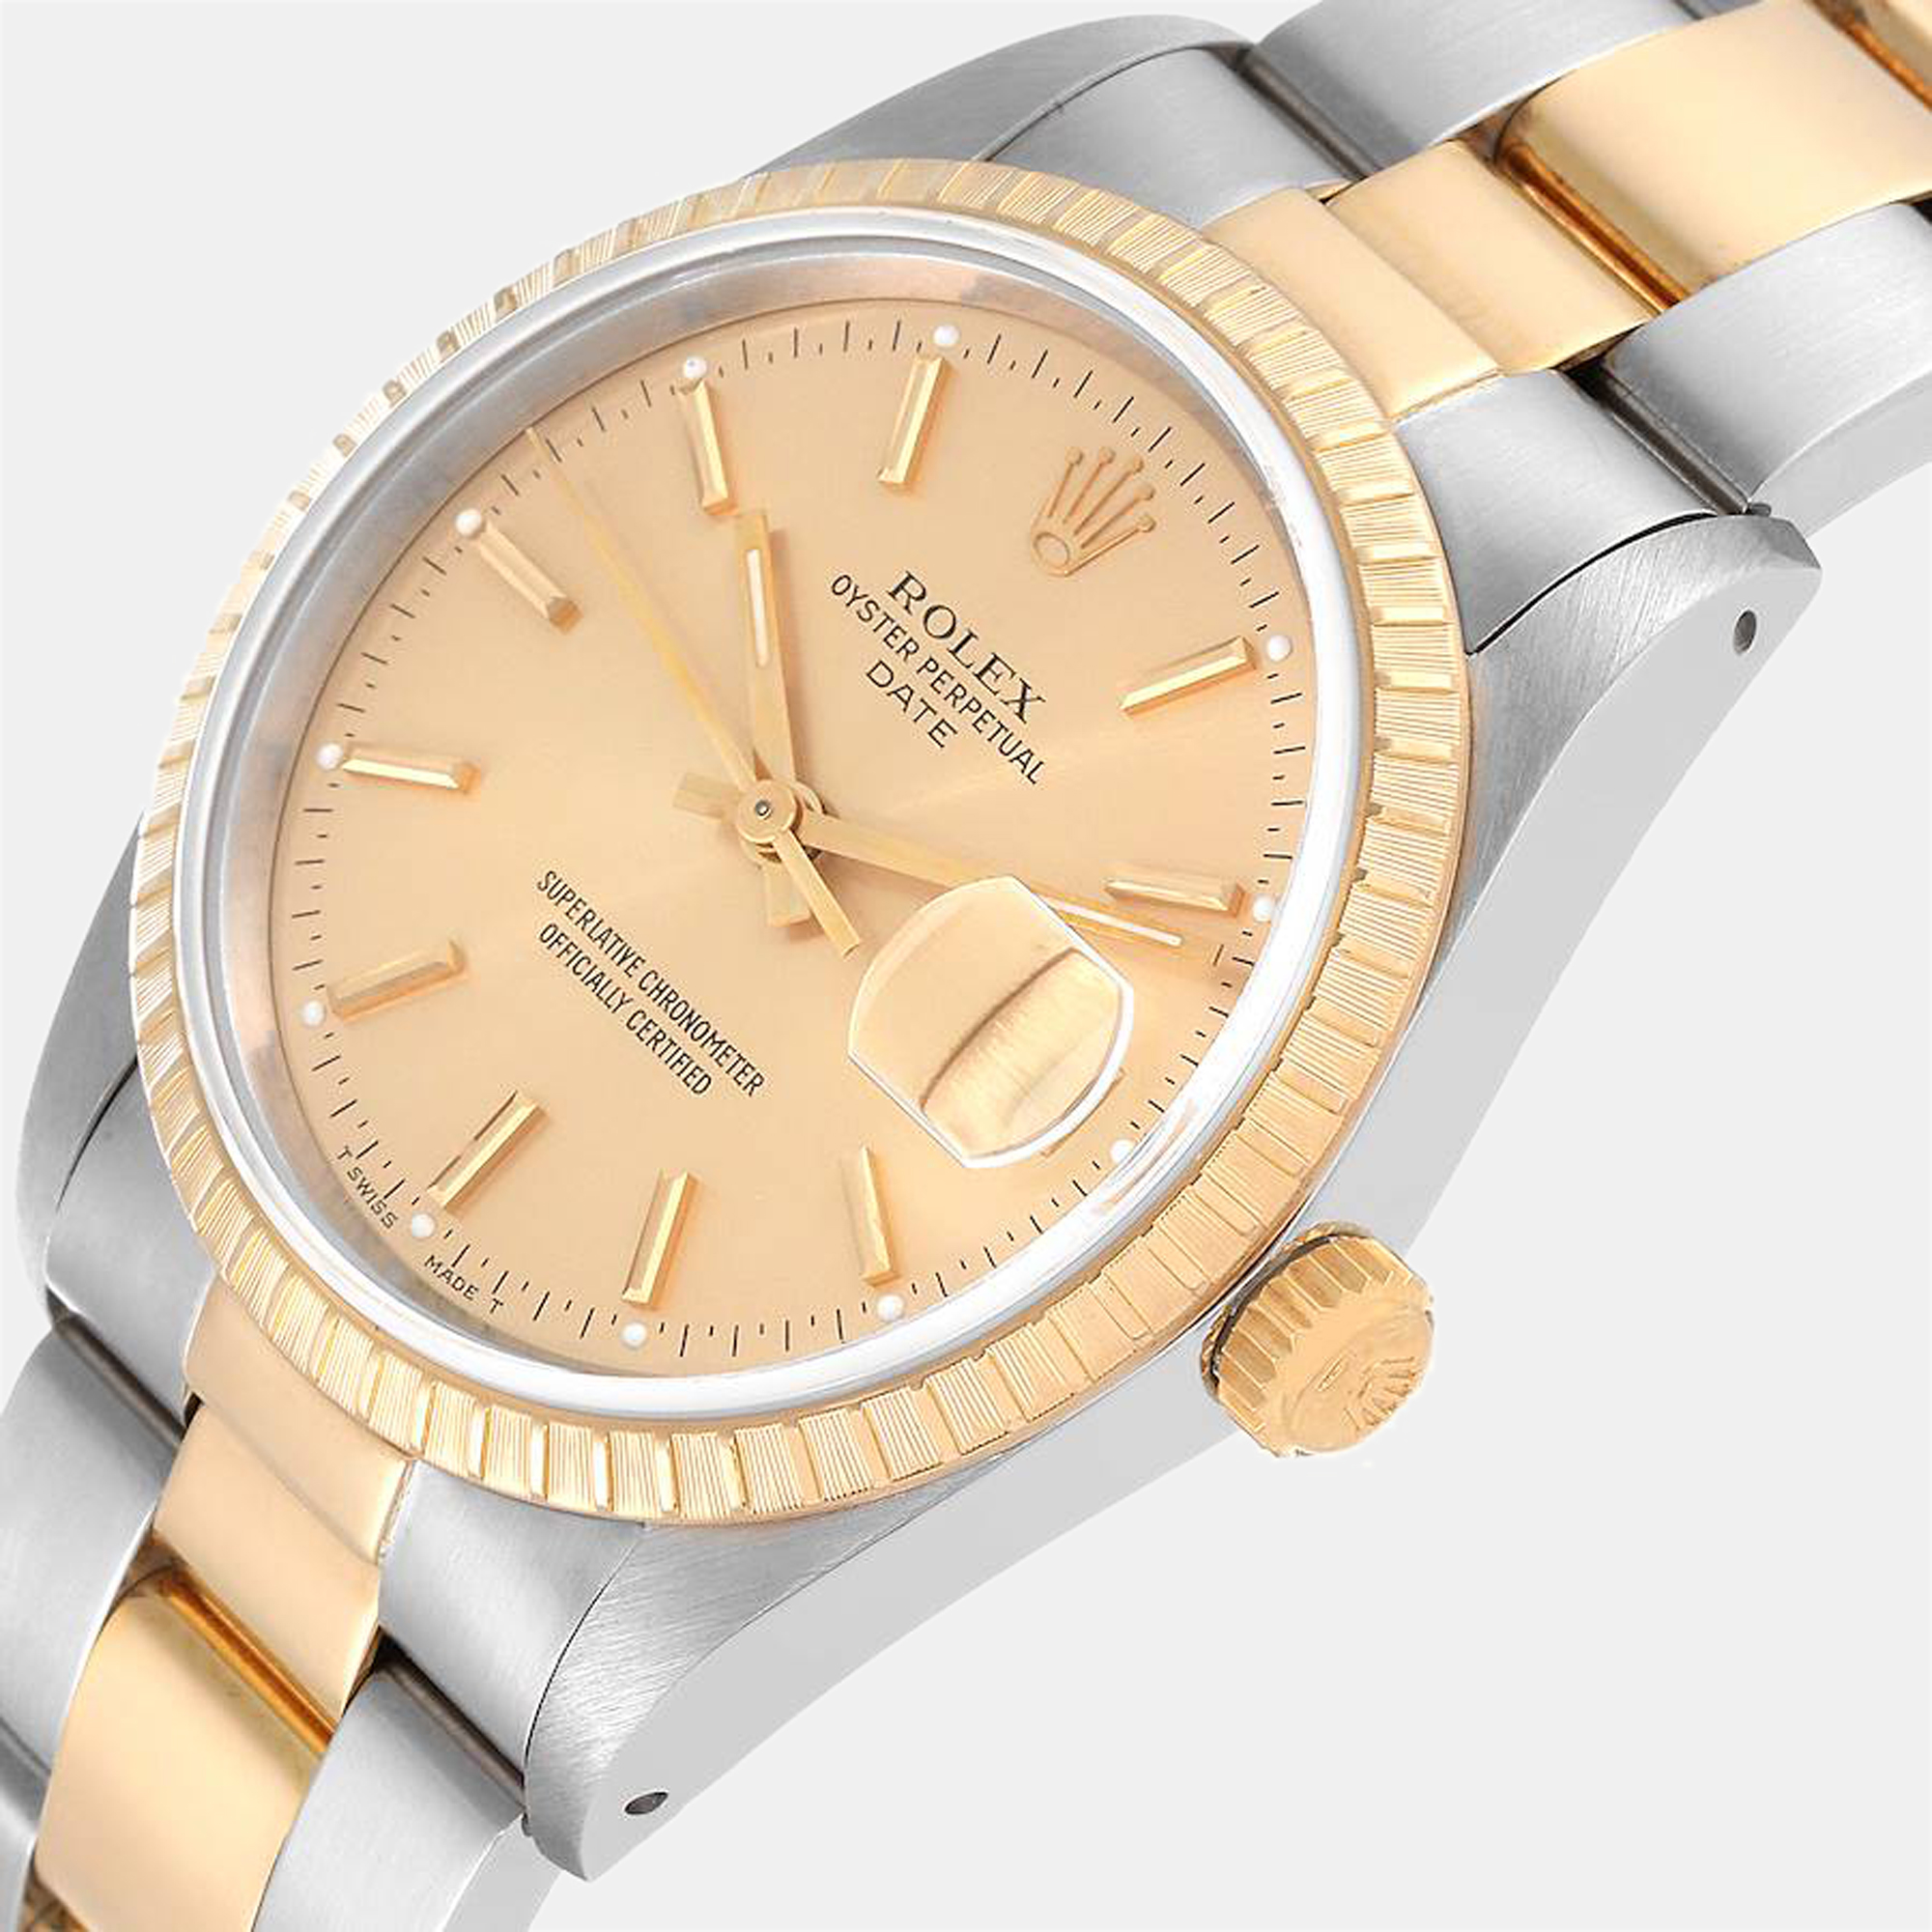 

Rolex Champagne 18K Yellow Gold And Stainless Steel Oyster Perpetual Date 15223 Men's Wristwatch 34 mm